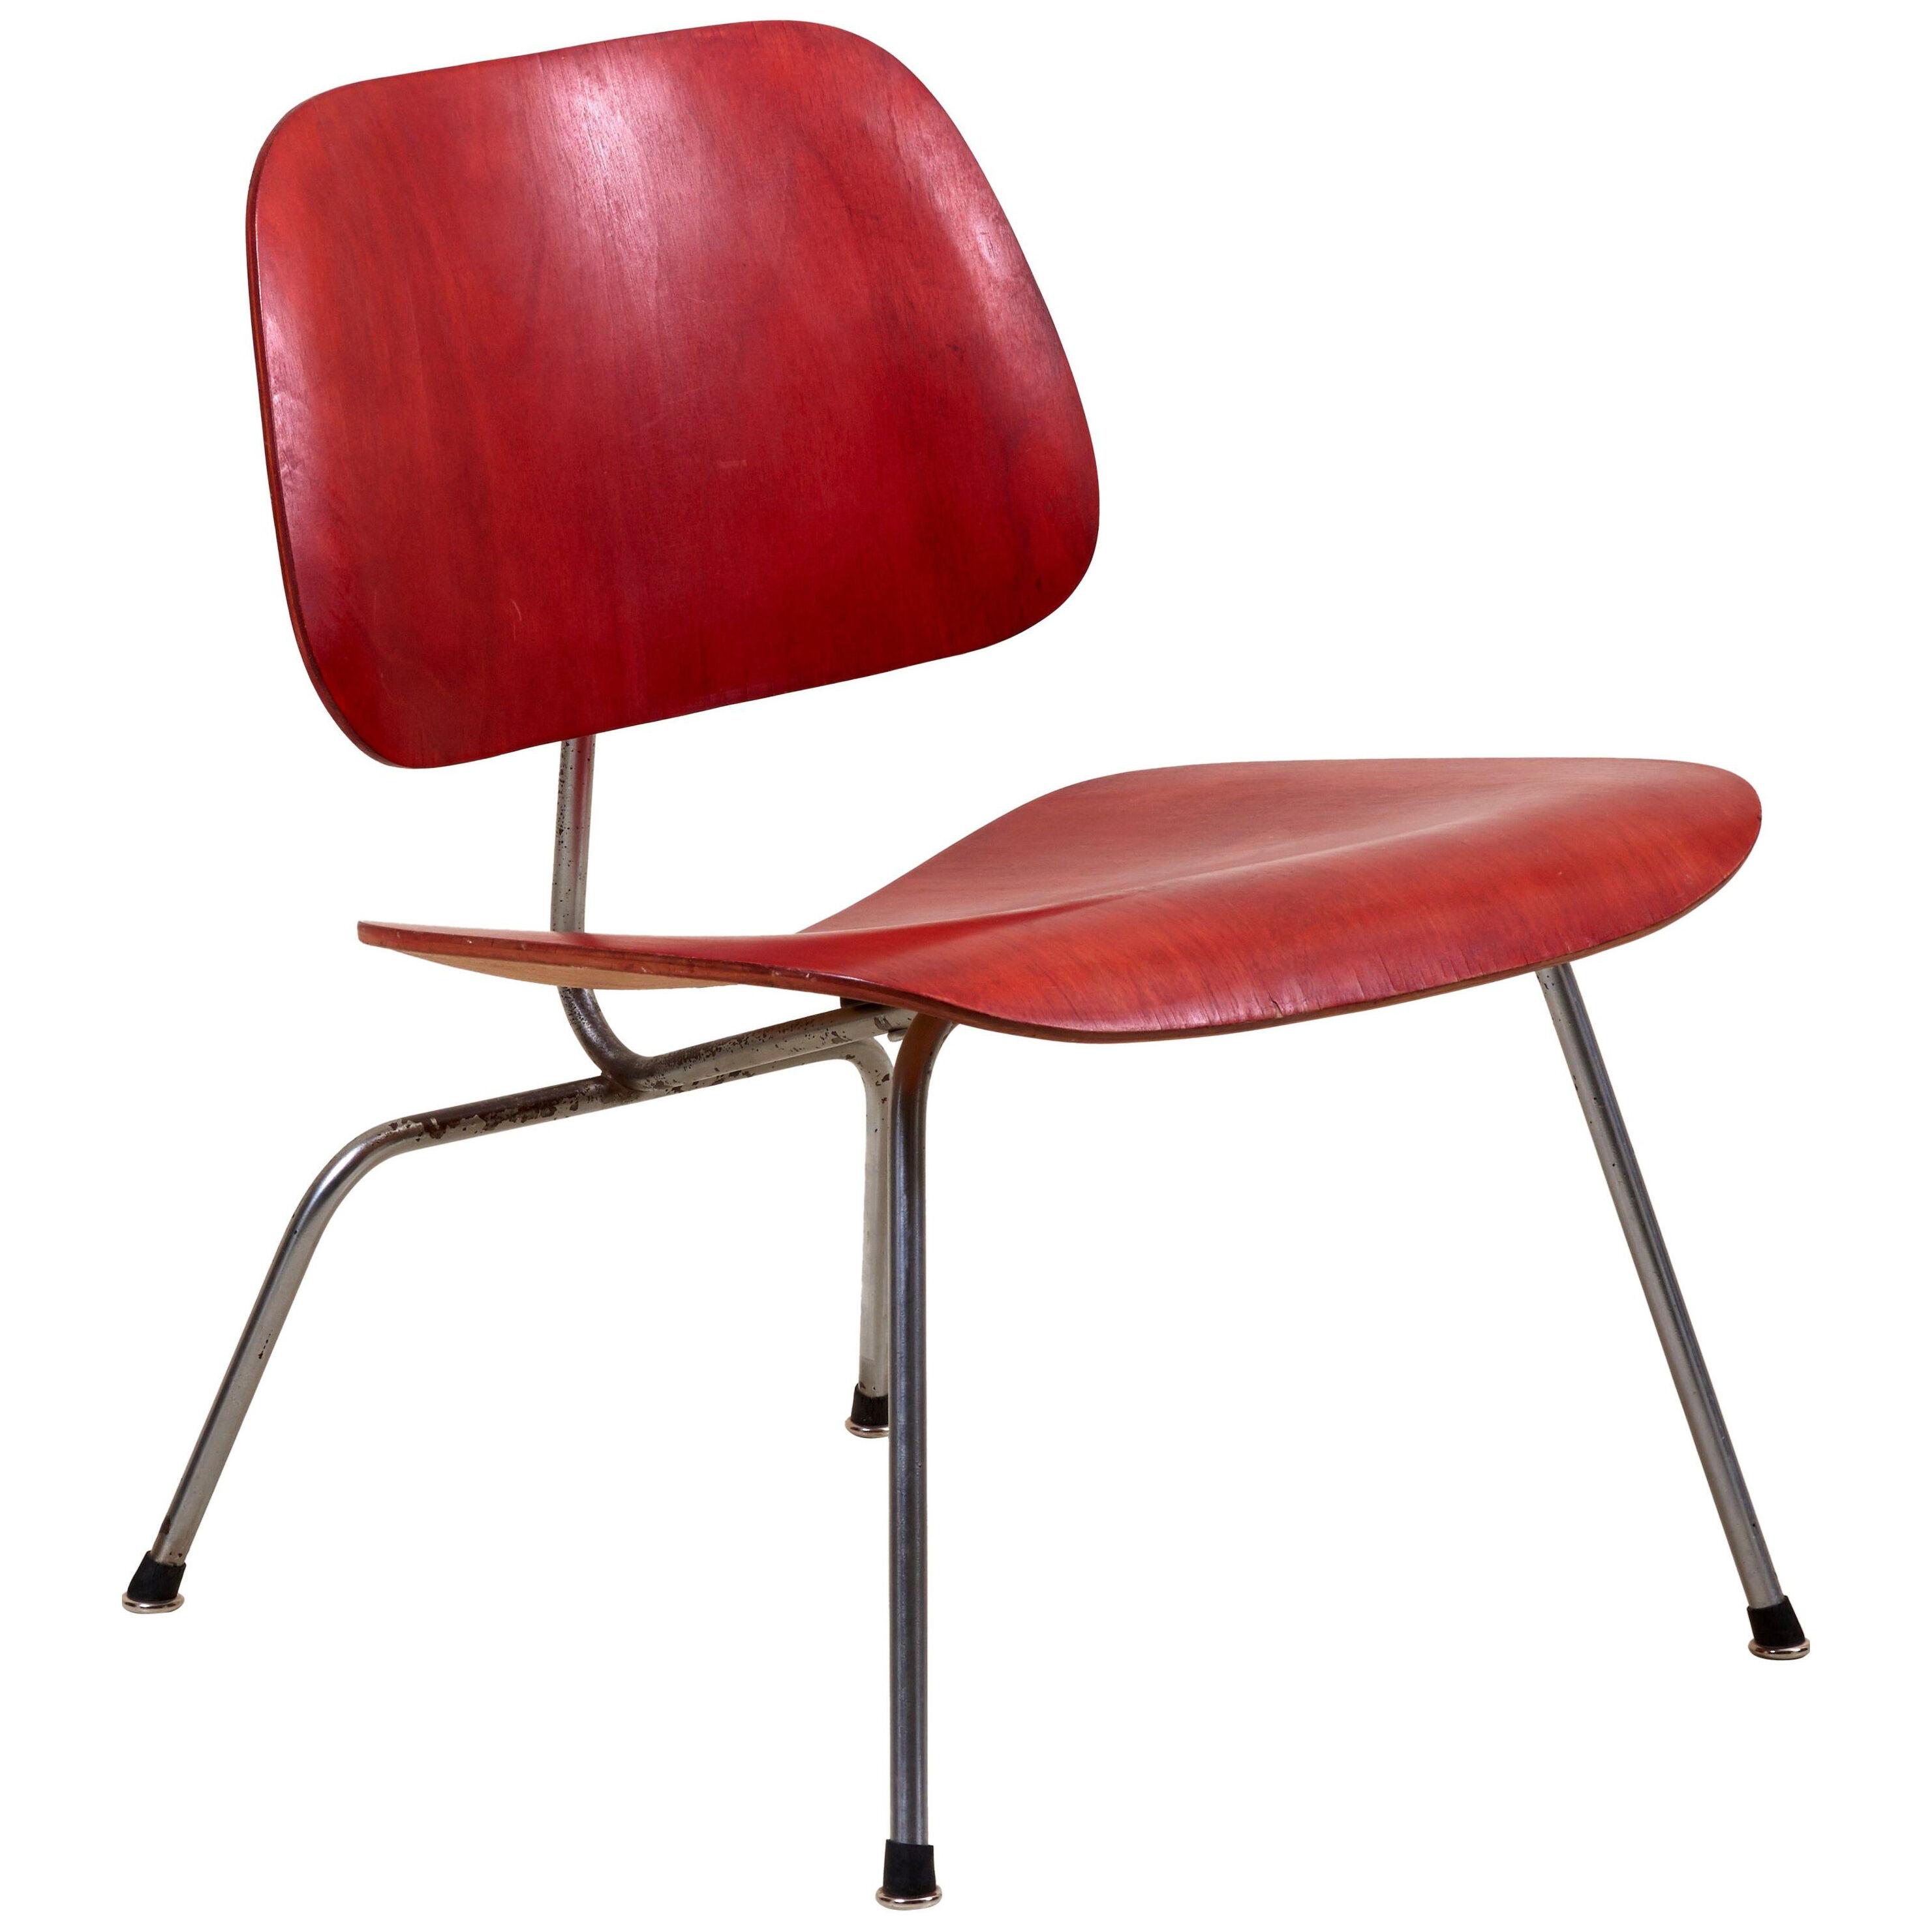 Early LCM Chair in Rare Aniline Red by Charles Eames for Herman Miller	